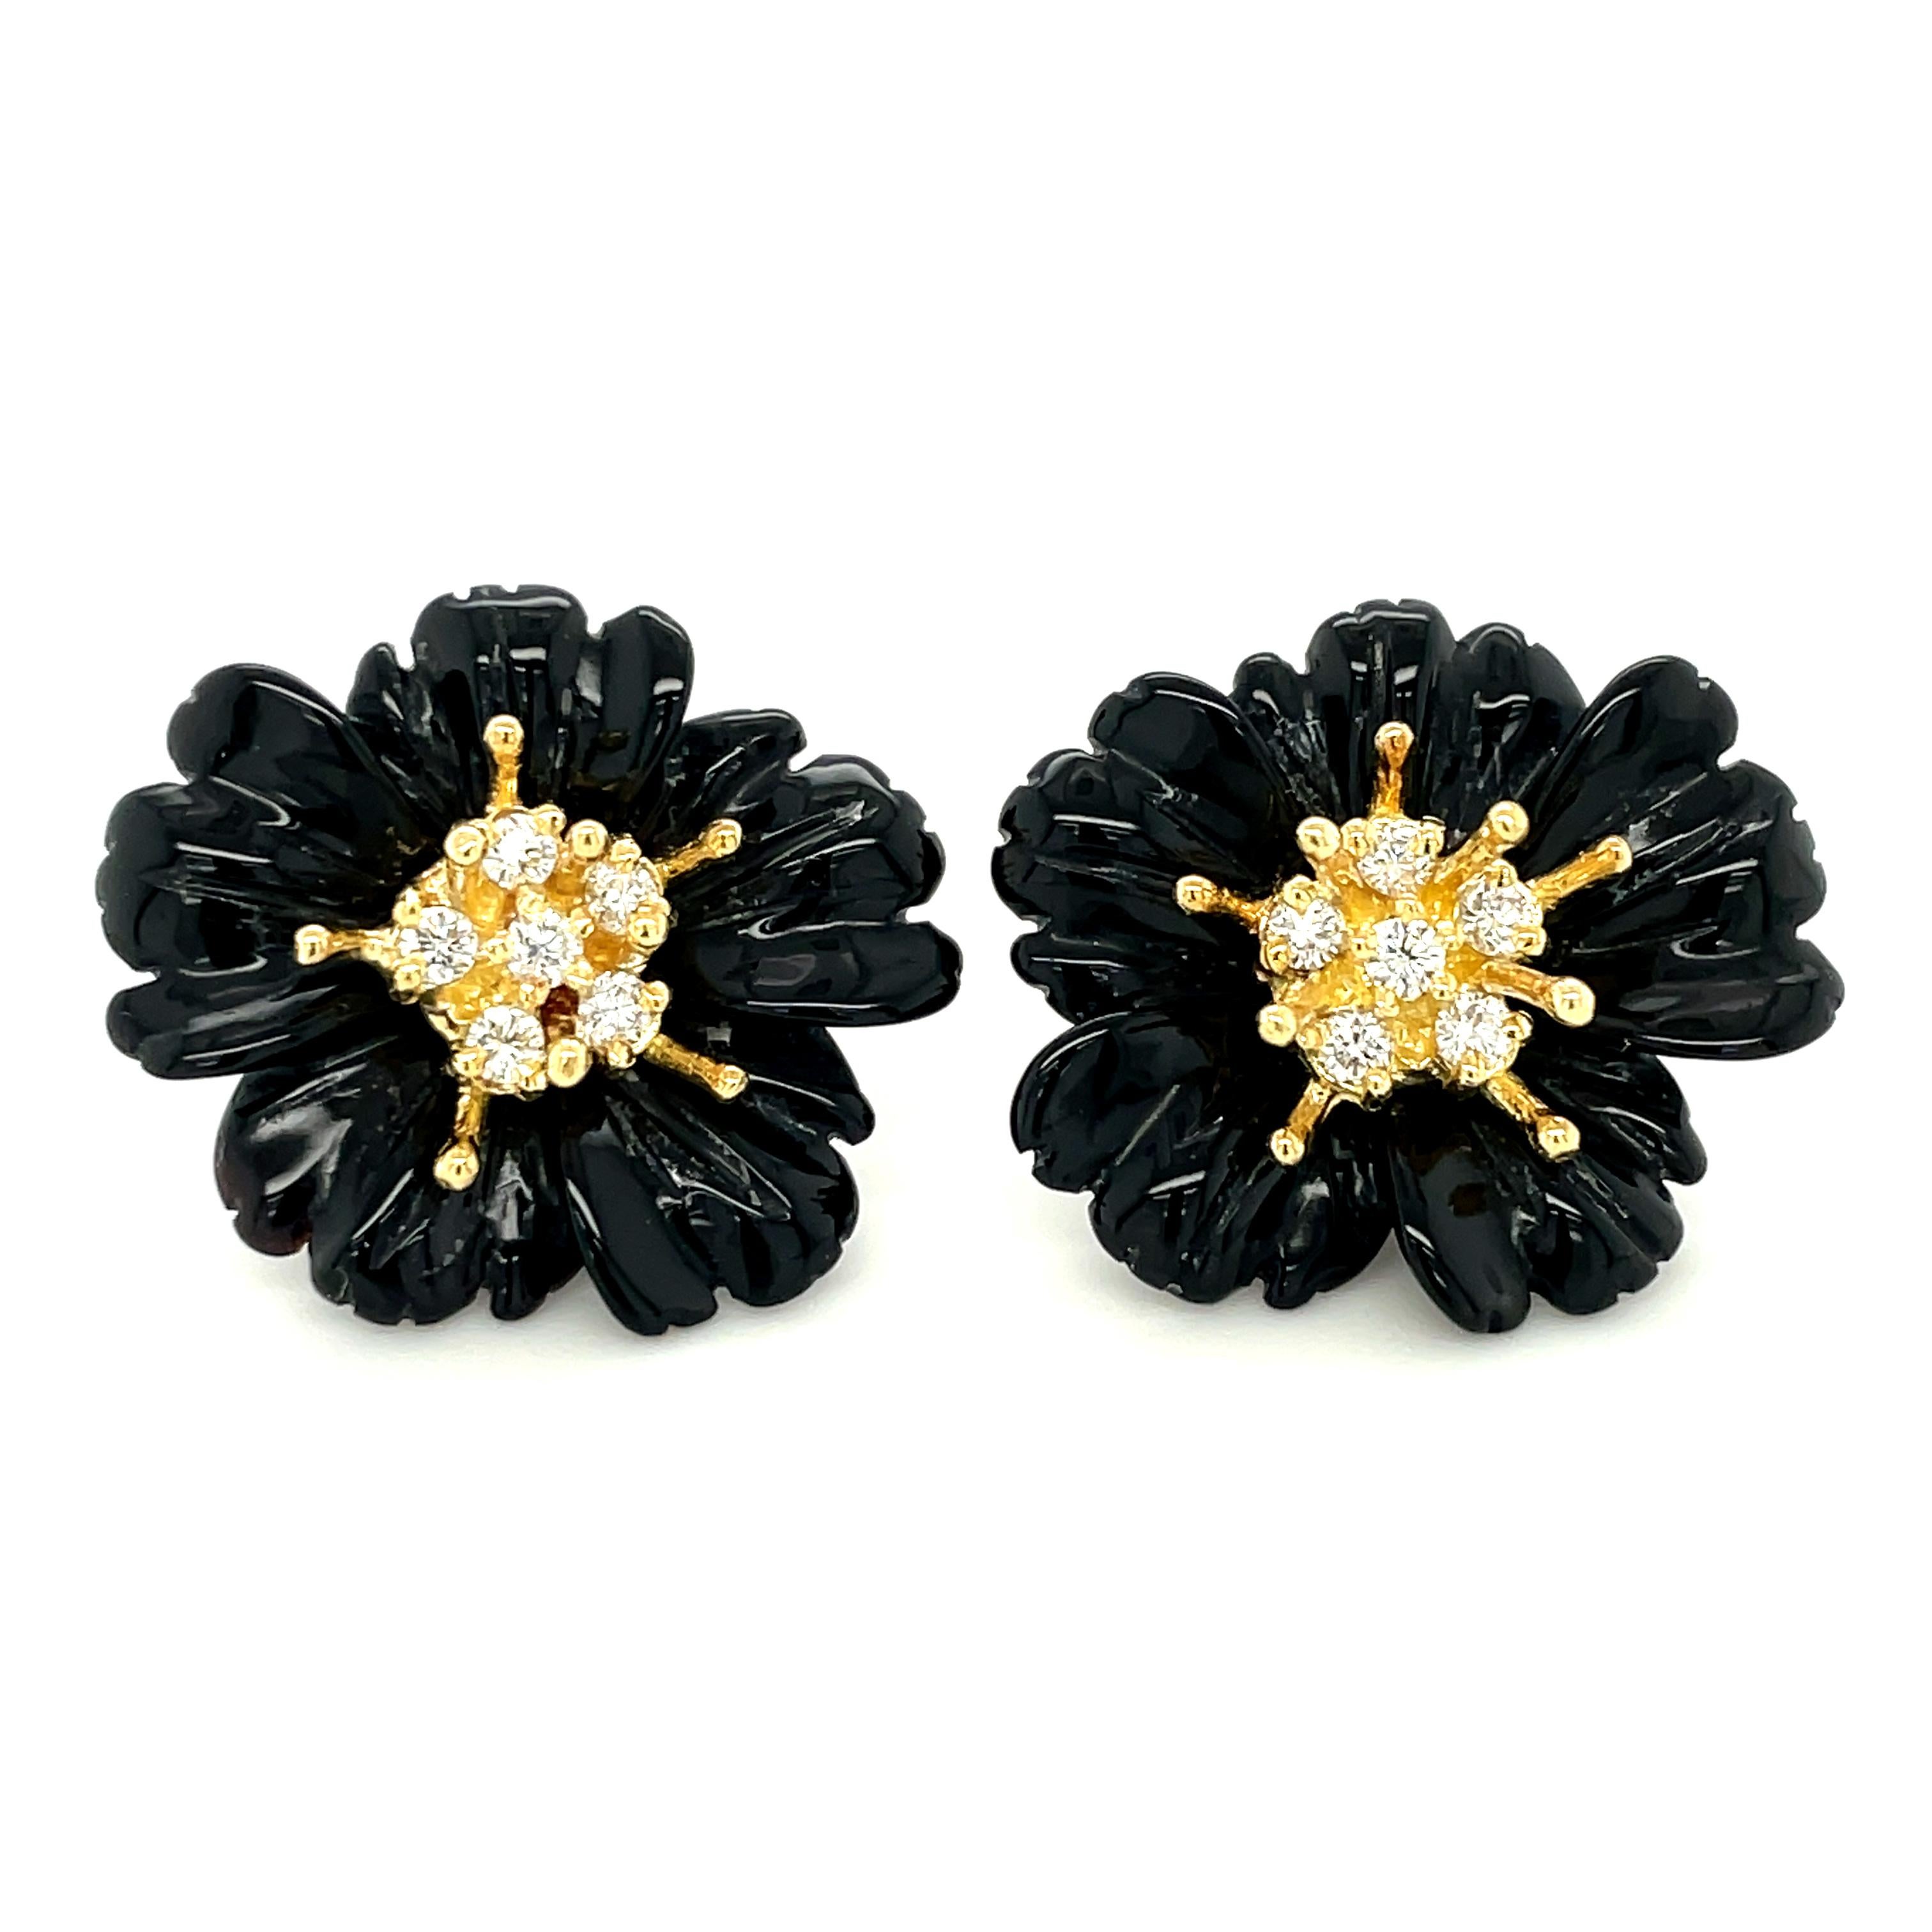 These finely hand-carved onyx earring jackets will add elegant and eye-catching style to your jewelry wardrobe! The 3-dimensional flowers were intricately carved from high-quality onyx and look stunning paired with our 18 yellow gold post earrings.